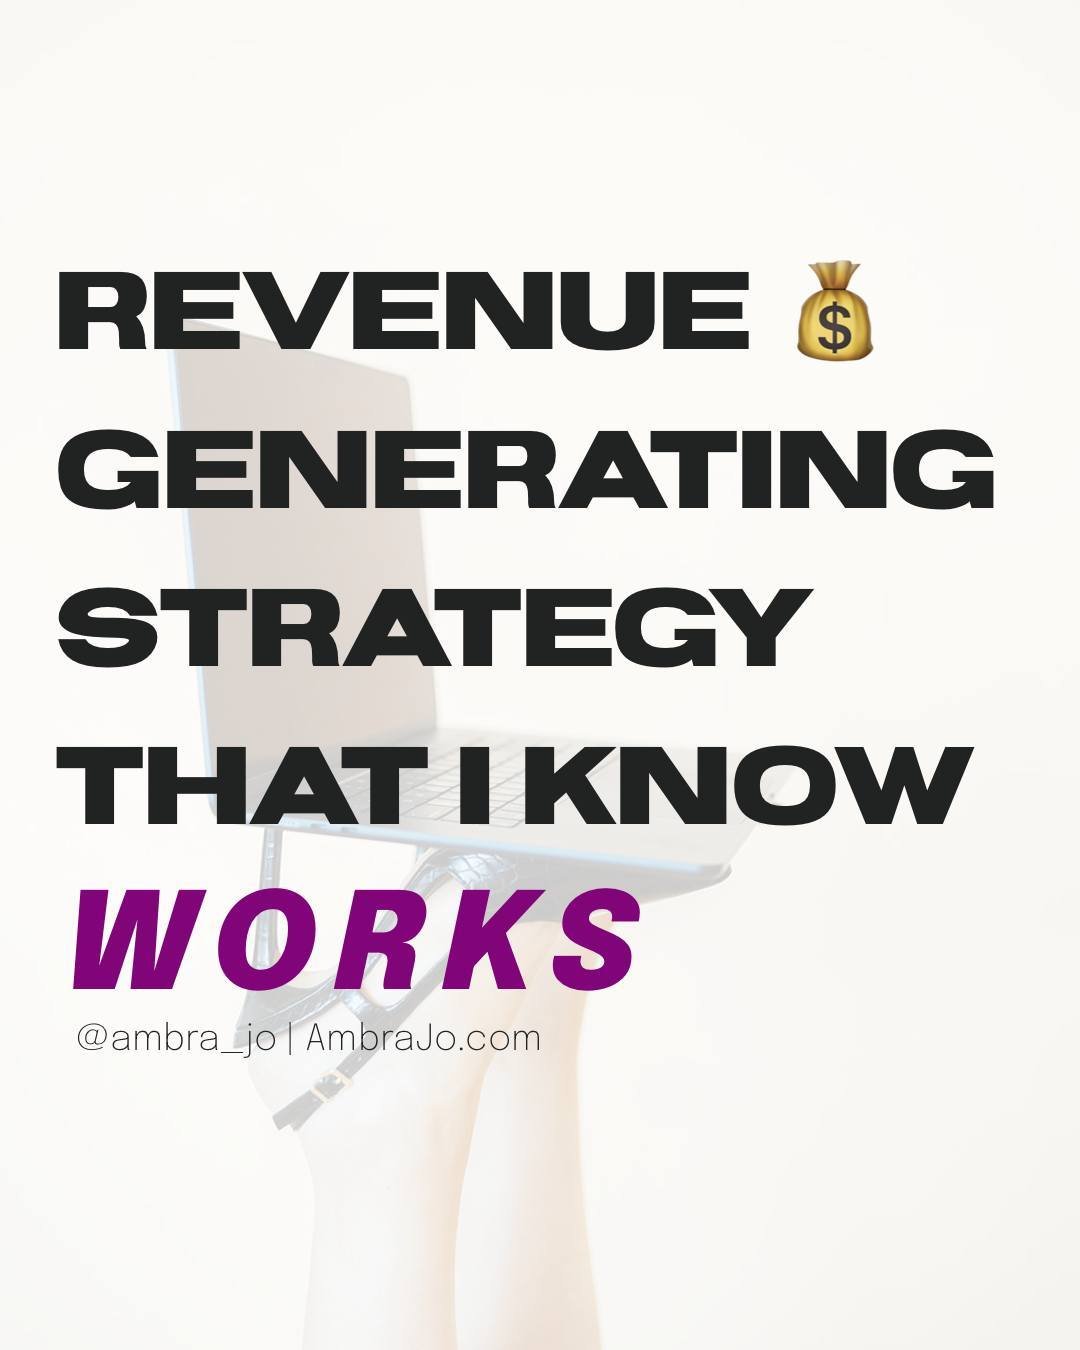 I&rsquo;ve watched it work time &amp; time again&hellip;.

The strategy that WORKS for serious money making revenue:

✔️ Being able to have a website do your marketing for you
✔️ Being able to express your clients experiences and results
✔️ Being cle